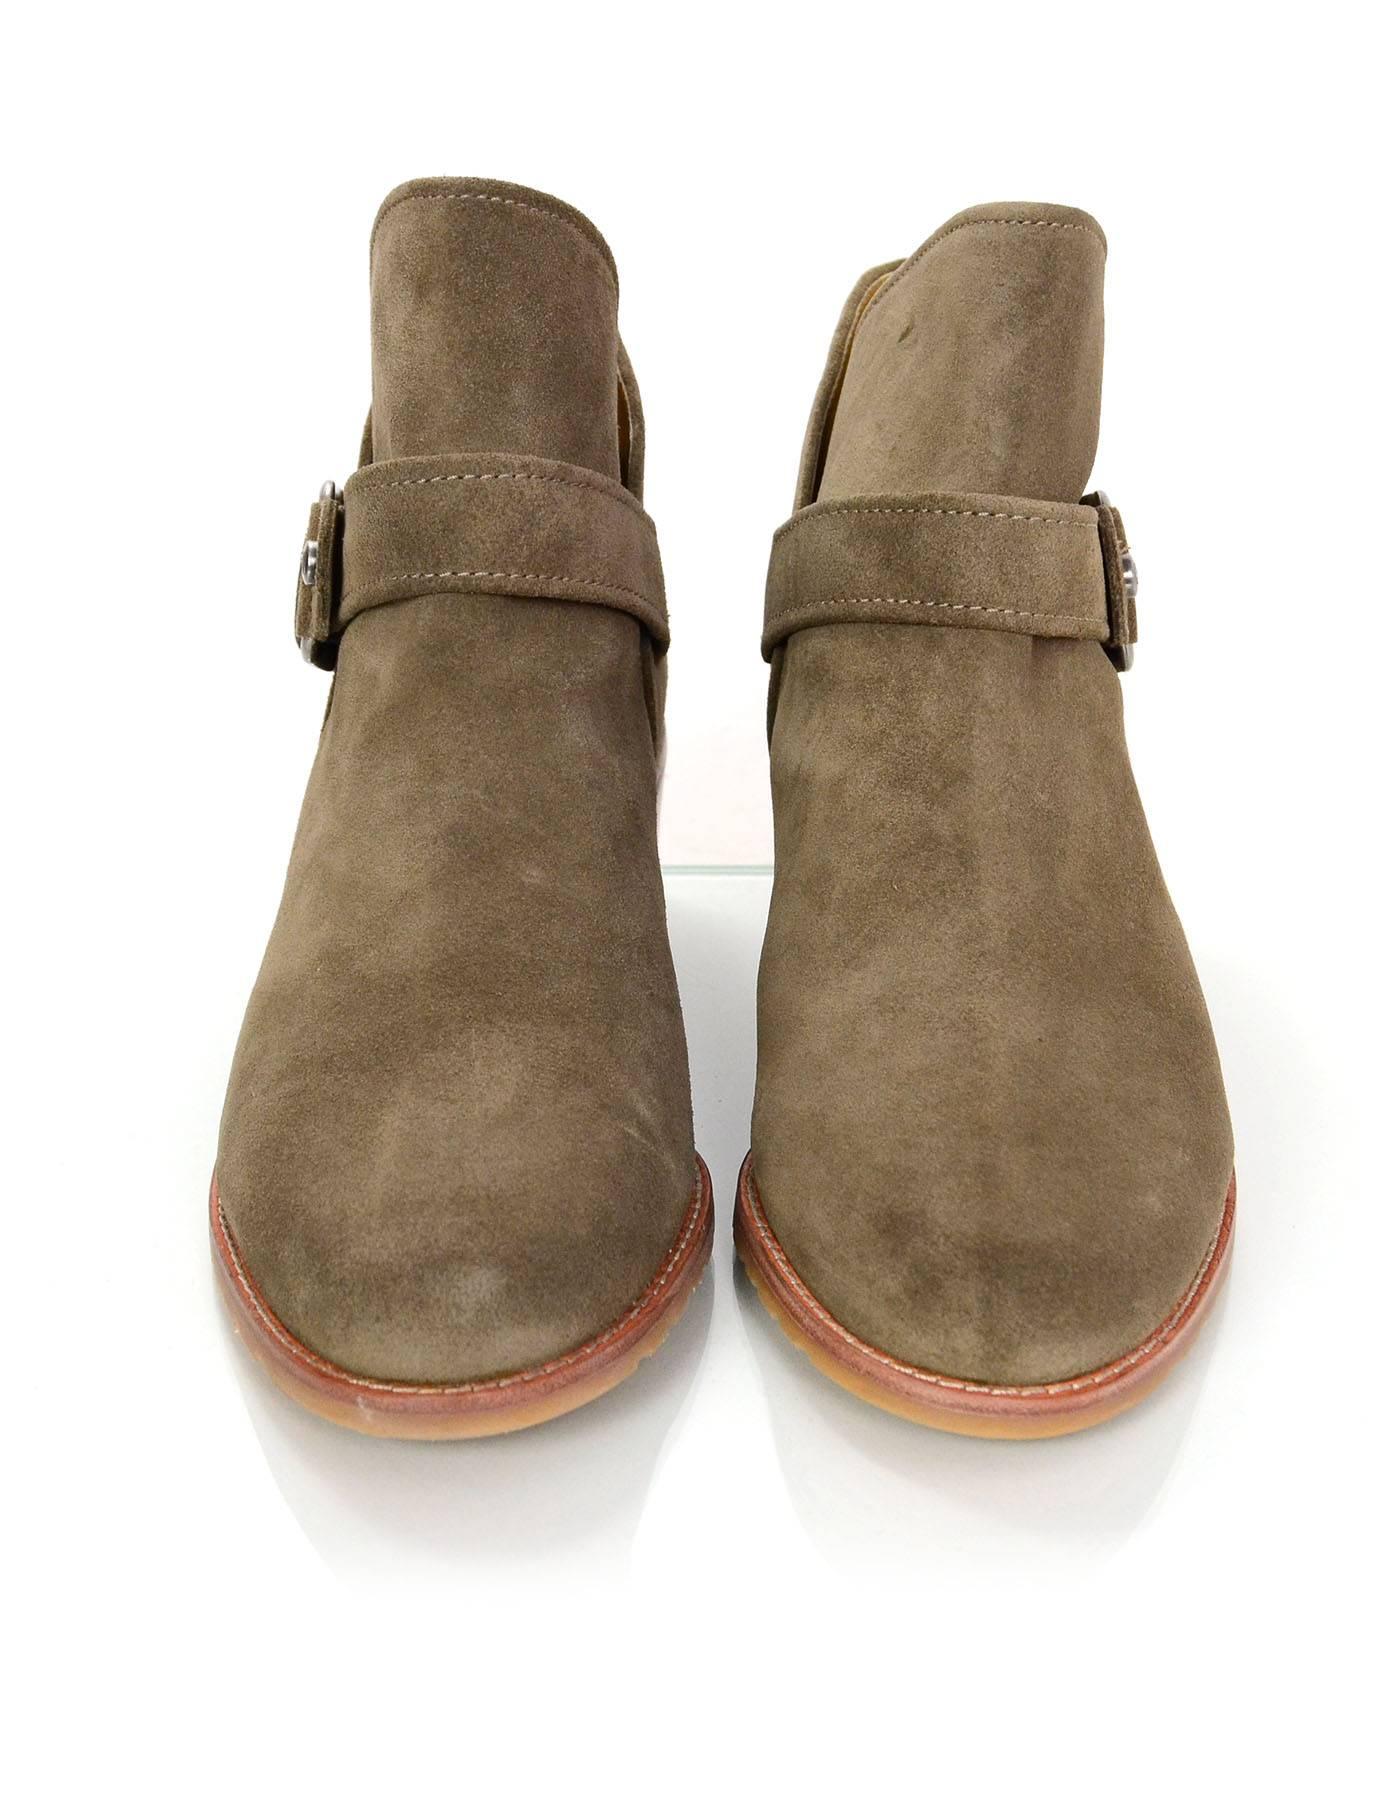 Brown Stuart Weitzman Taupe Dude Suede Ankle Boots Sz 8.5 NEW